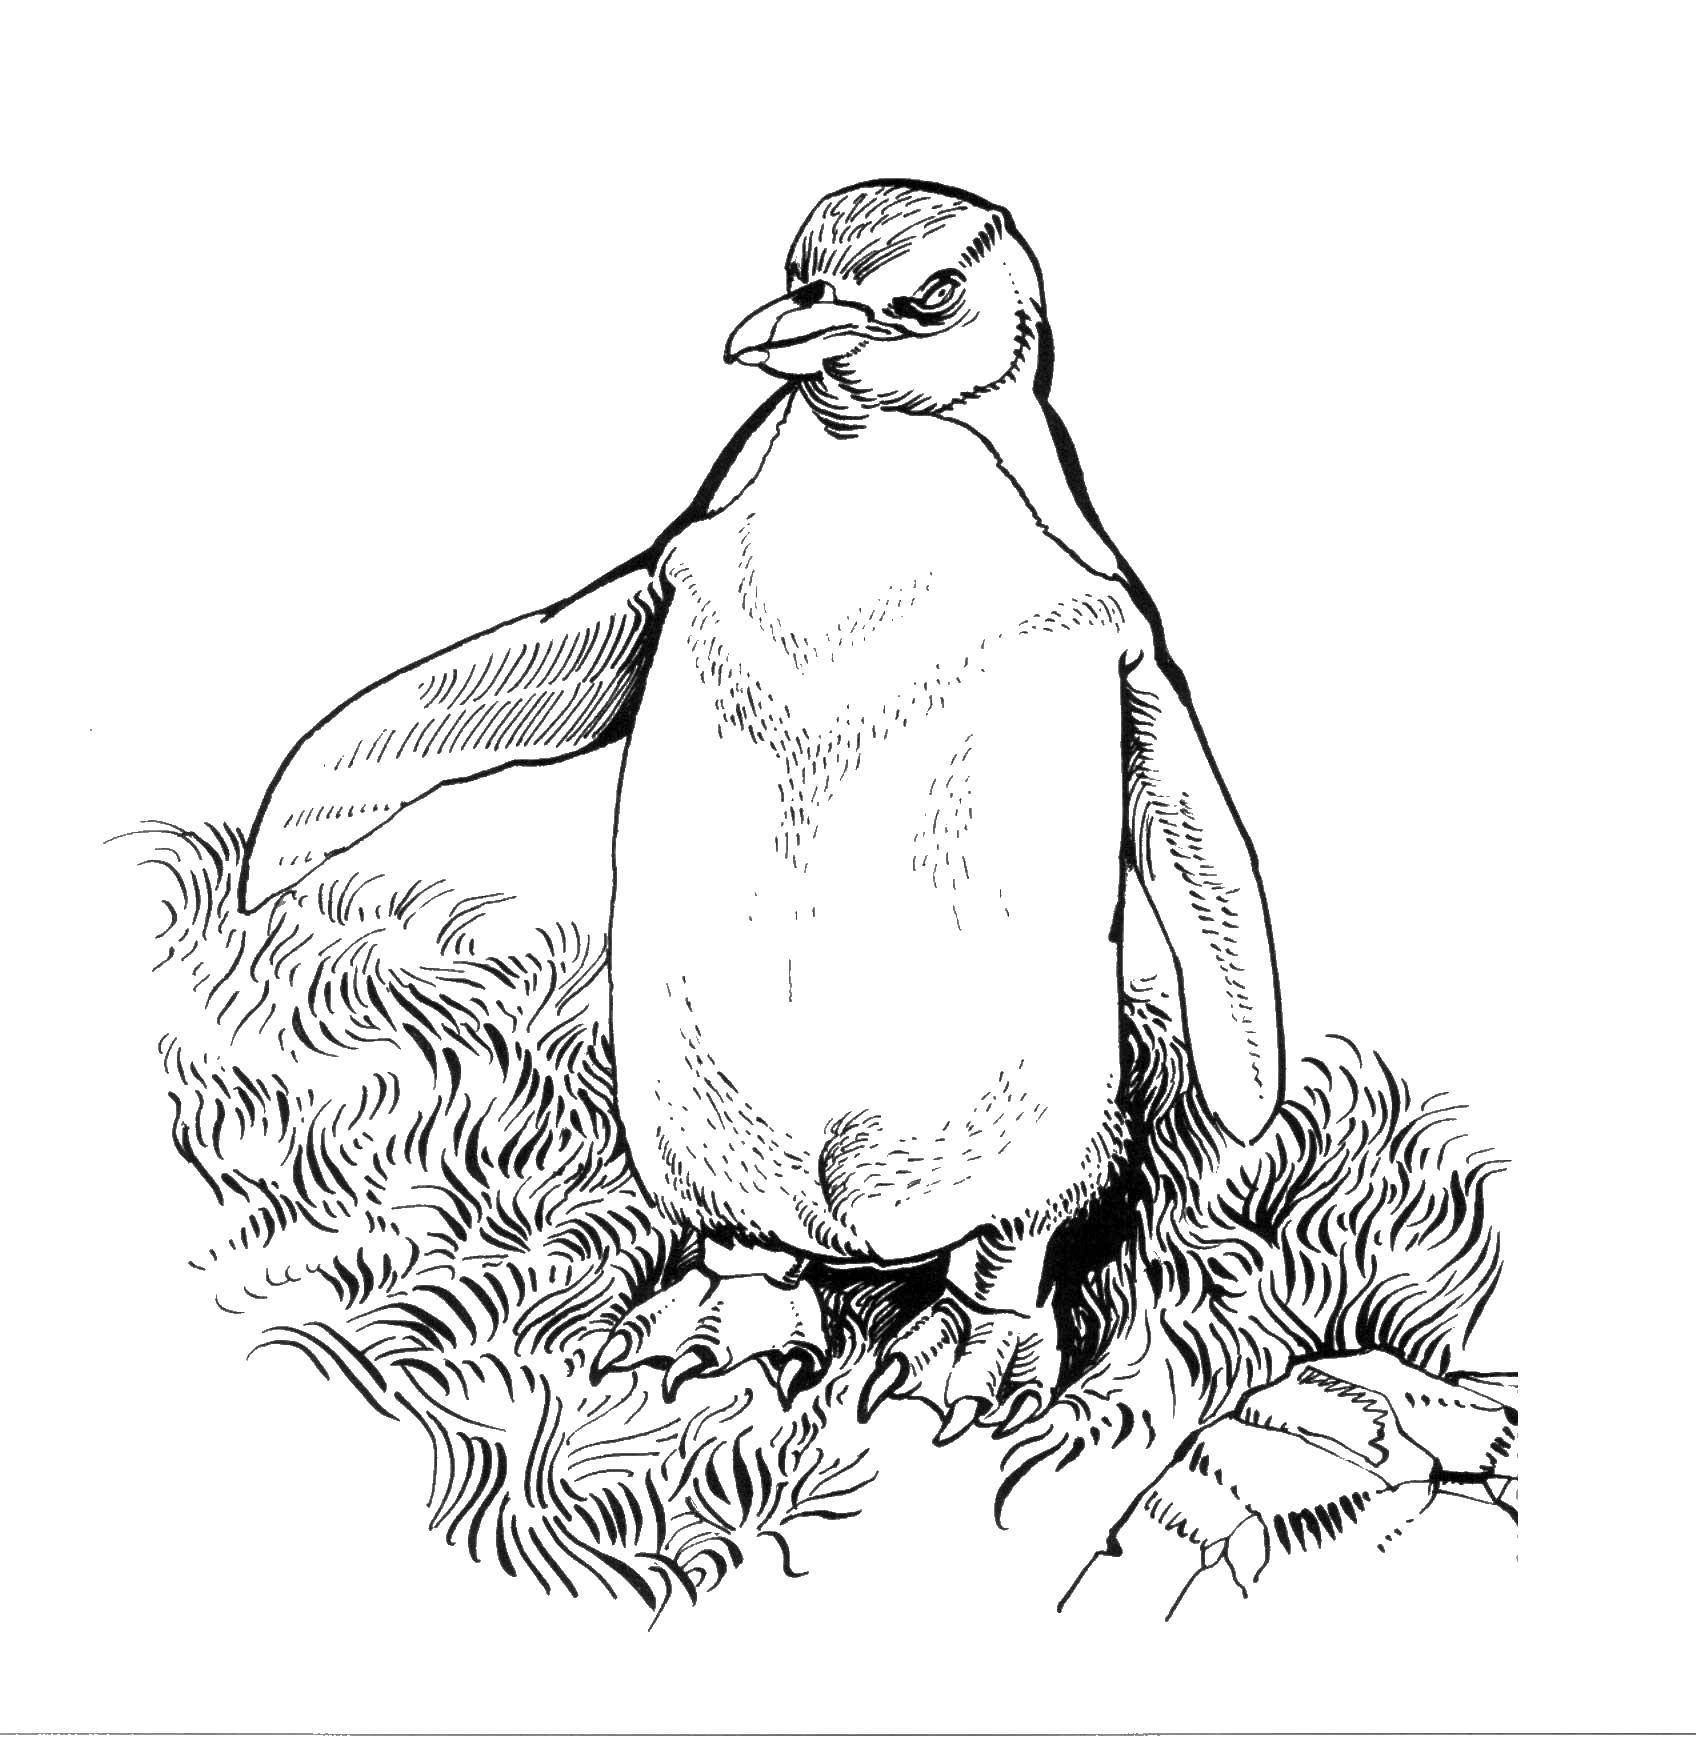 Coloring Penguin. Category birds. Tags:  The penguin.